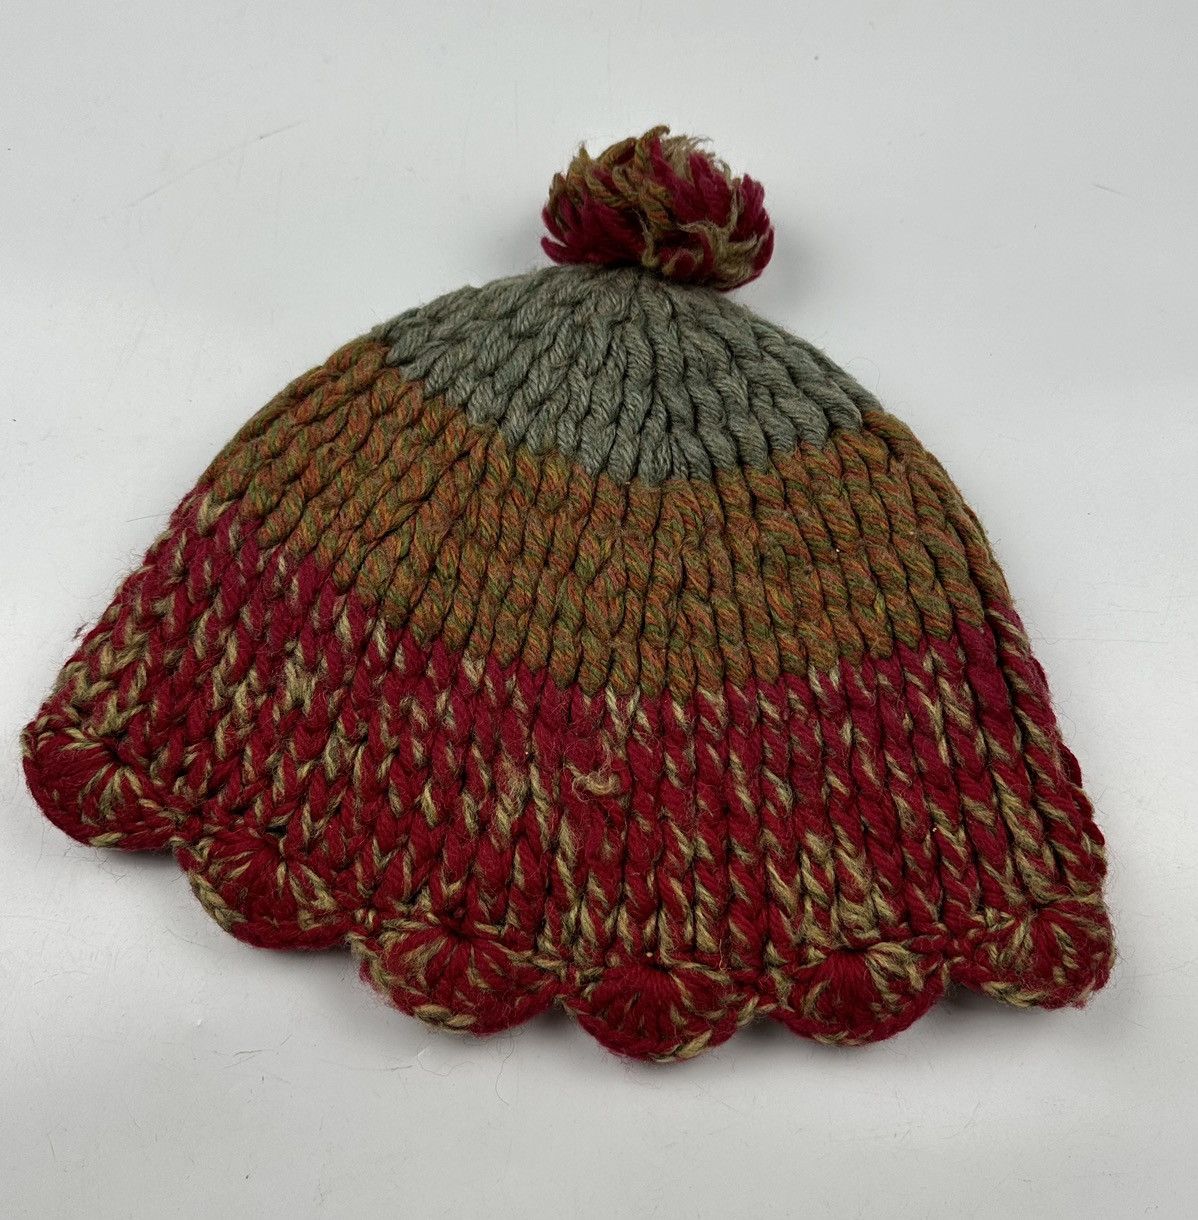 custom made knitted hat tg3 - 5